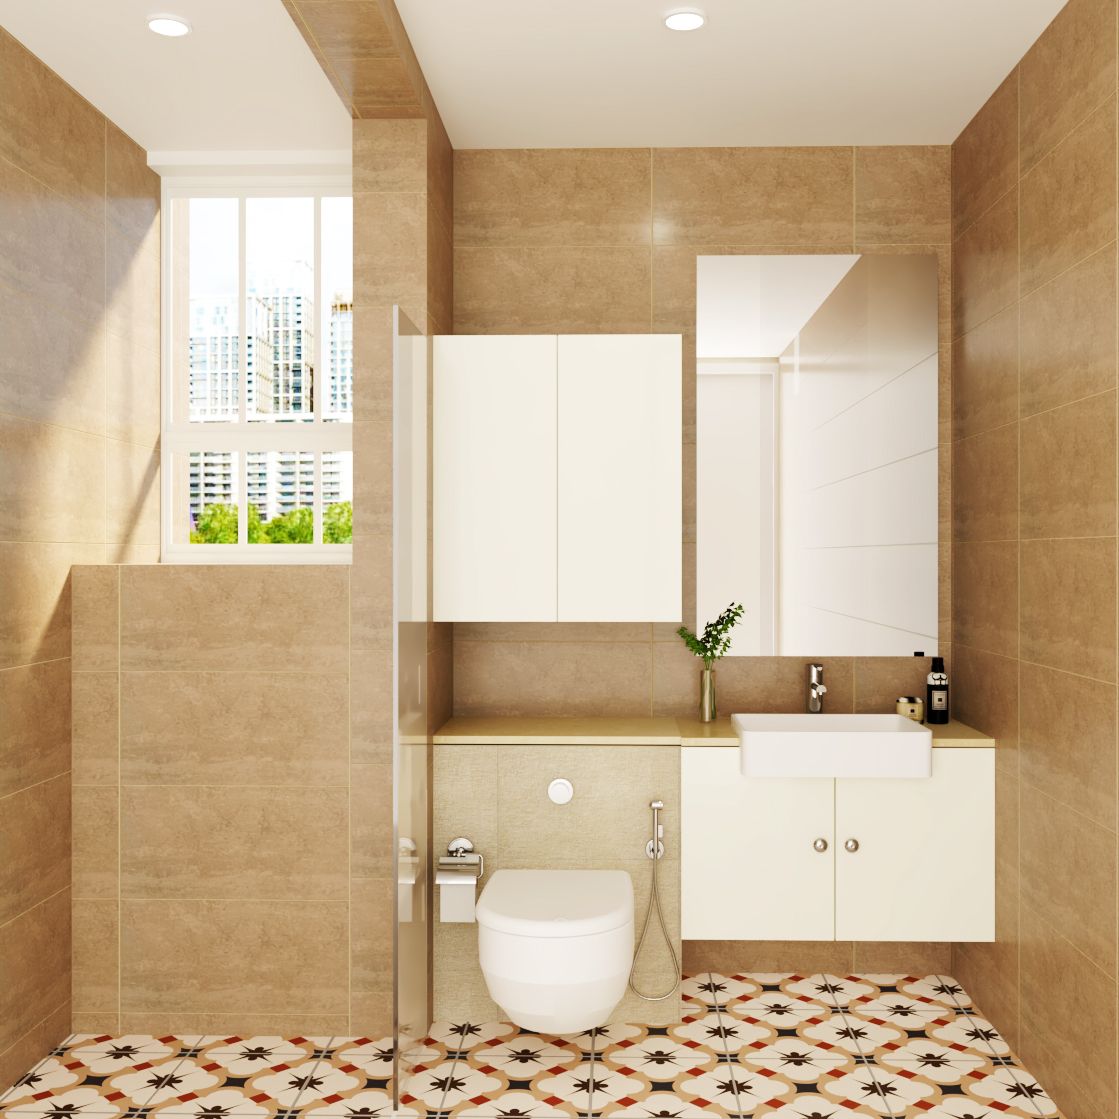 Classic Brown-Toned Bathroom Design With Smart Space-Saving Storage